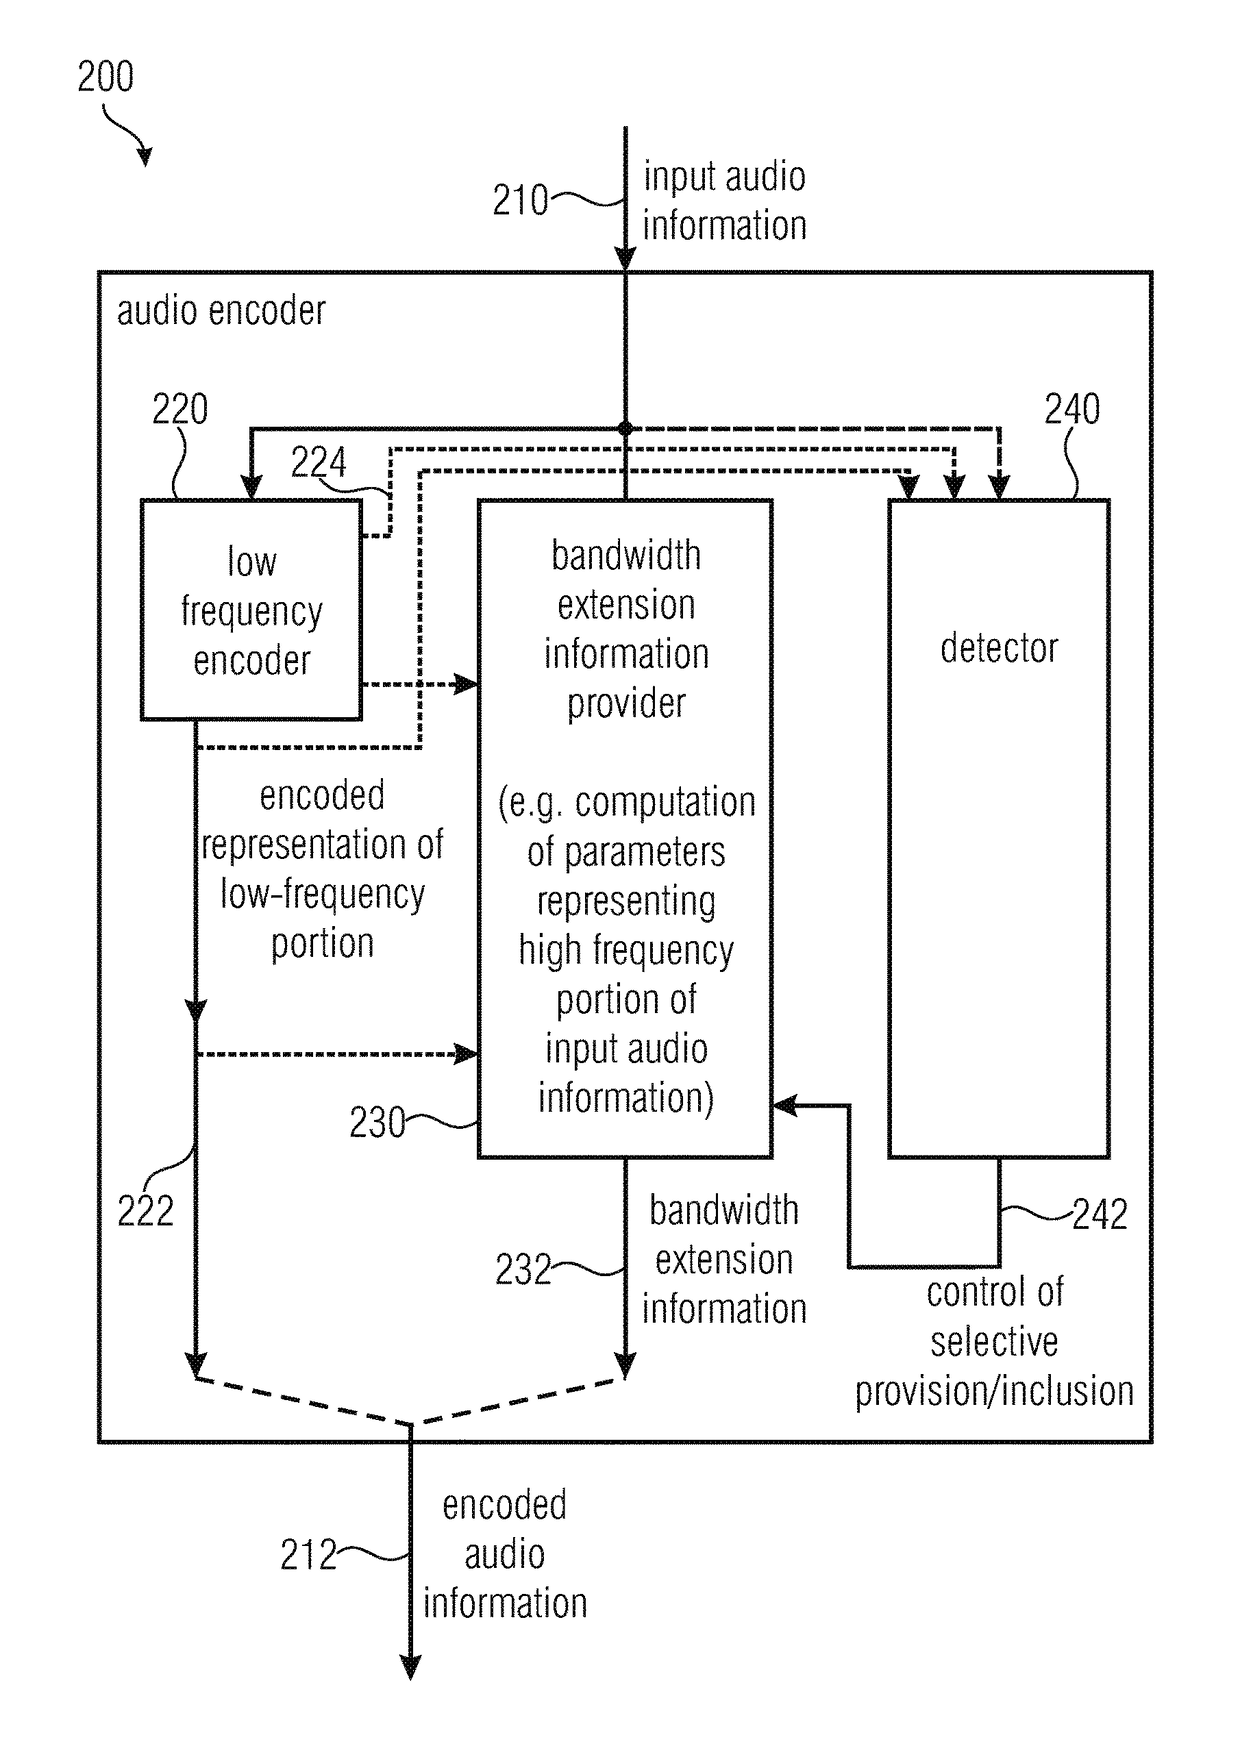 Audio encoder, audio decoder, method for providing an encoded audio information, method for providing a decoded audio information, computer program and encoded representation using a signal-adaptive bandwidth extension